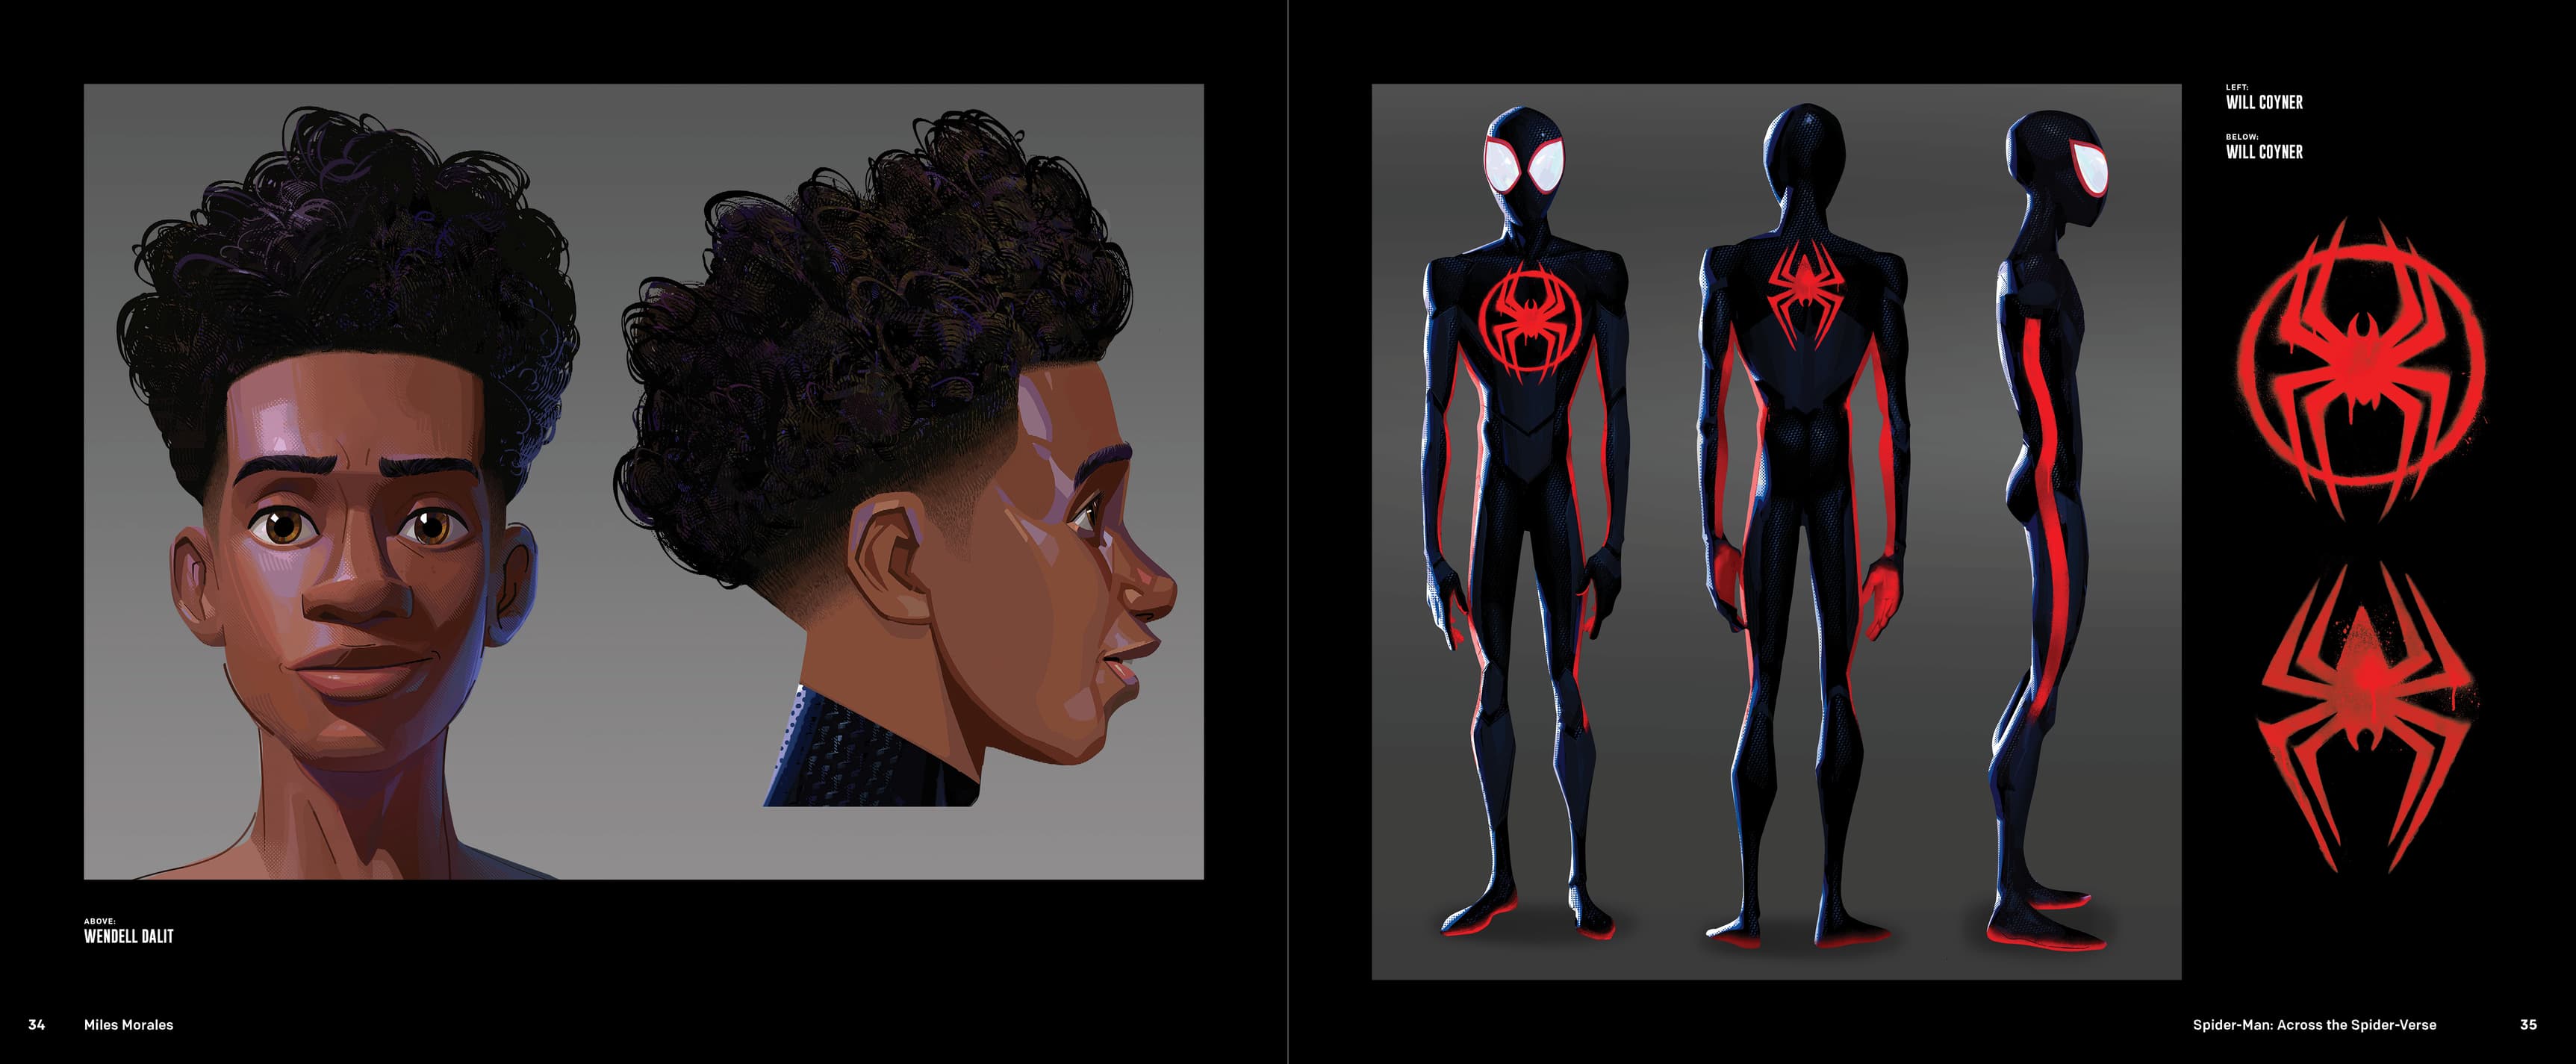 Spider-Man: Across the Spider-Verse: The Art of the Film excerpt